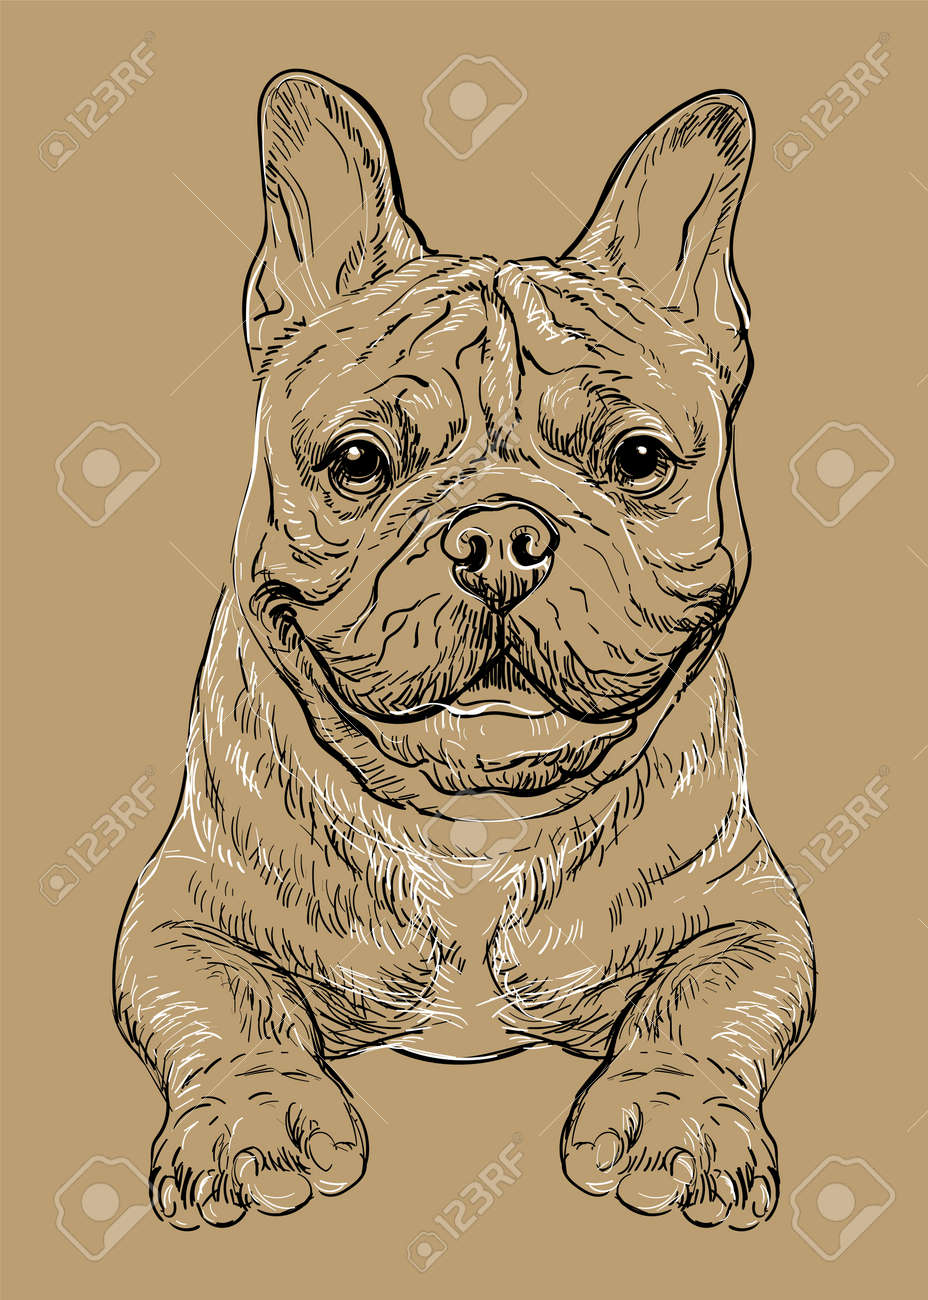 Realistic head of french bulldog dog vector hand drawing illustration isolated on brown background for decoration coloring book pages design print posters postcards stickers t